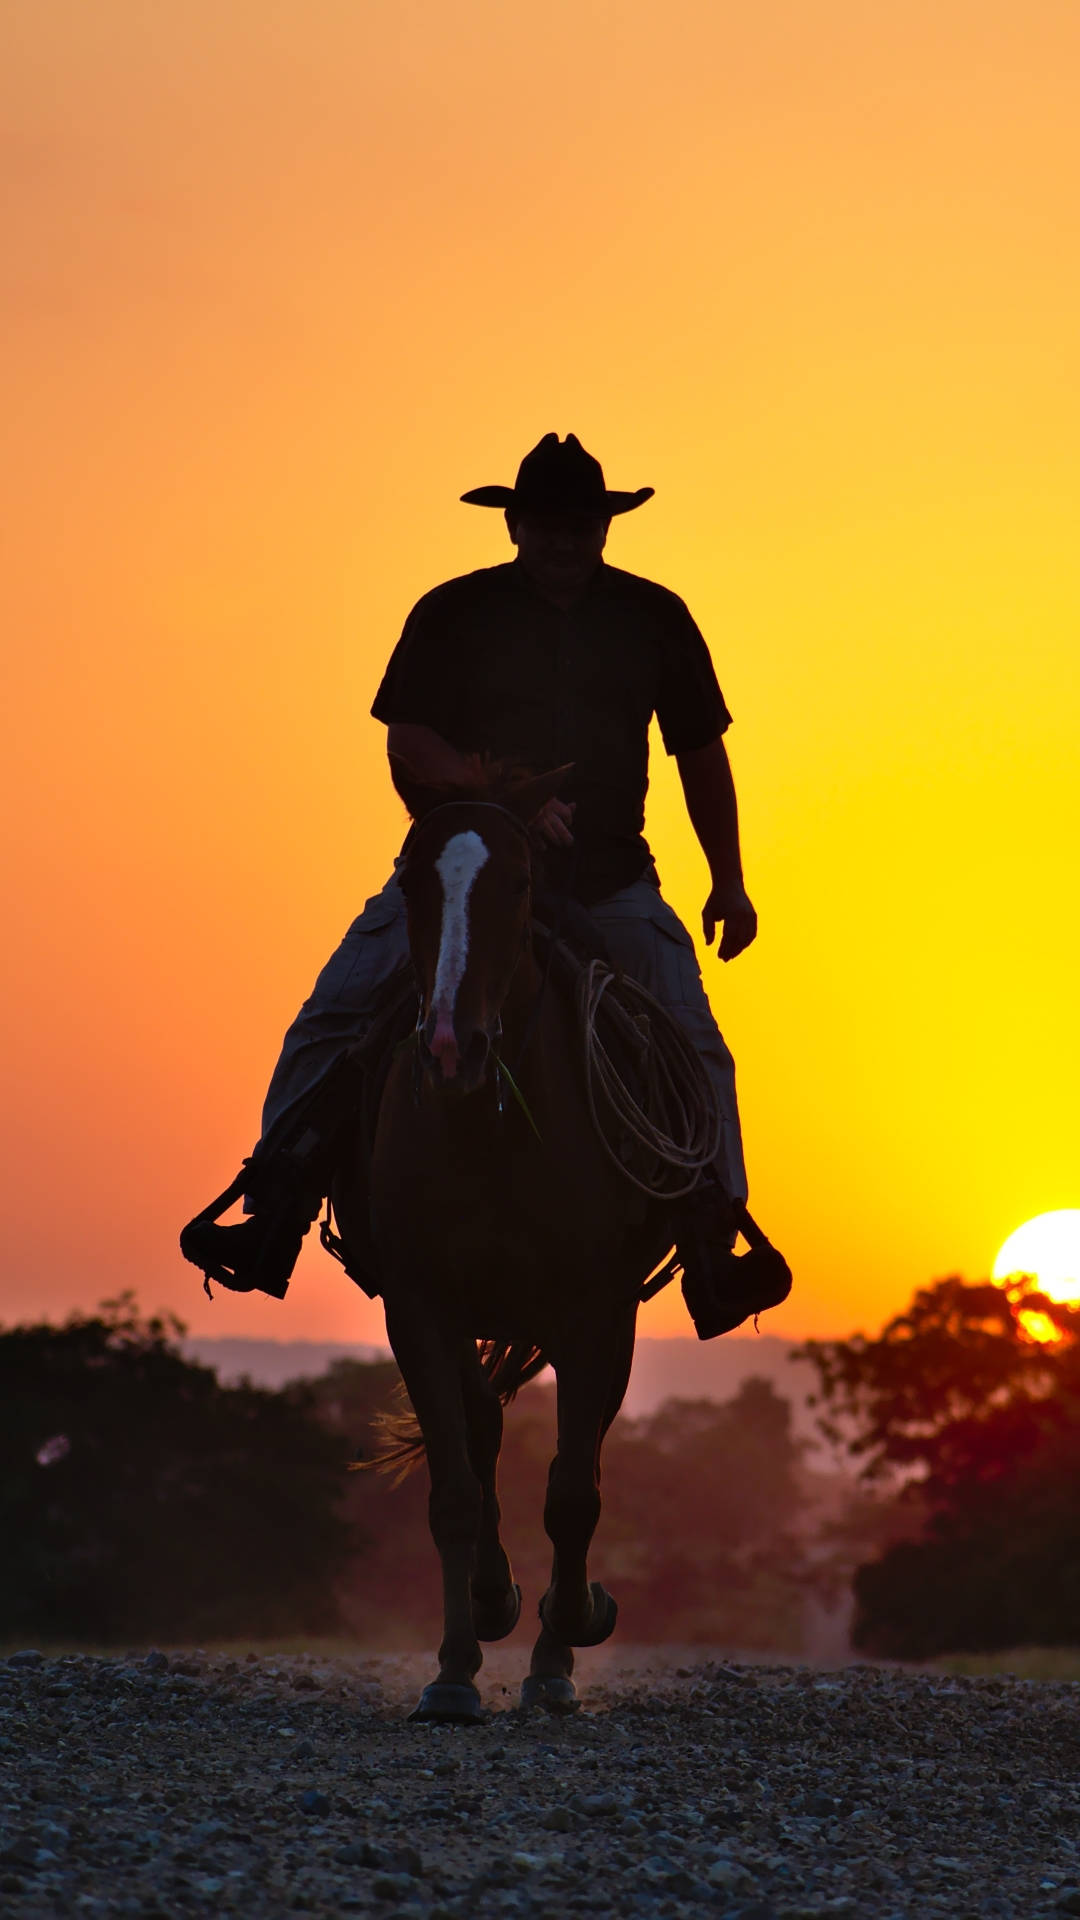 Cowboy Silhouette On Sunset Background